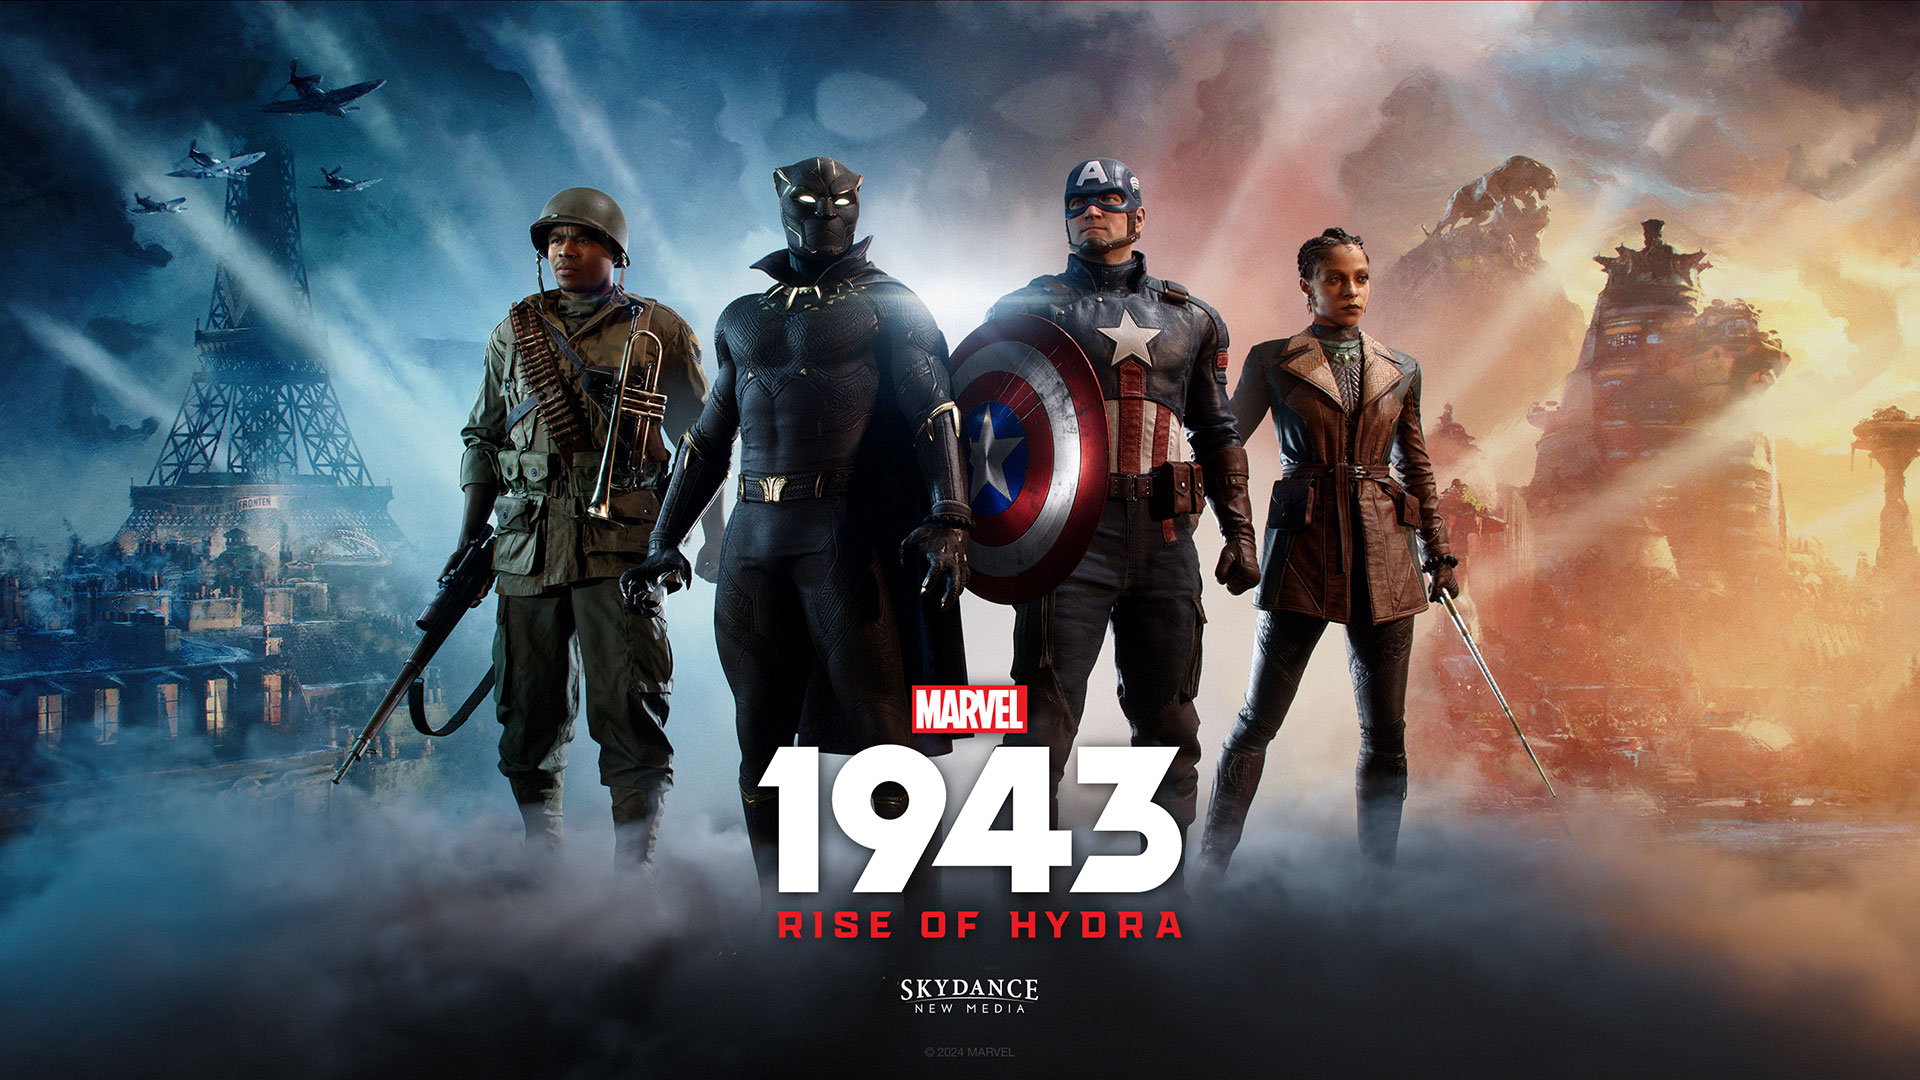 Marvel 1943: Rise of Hydra has shared a story trailer